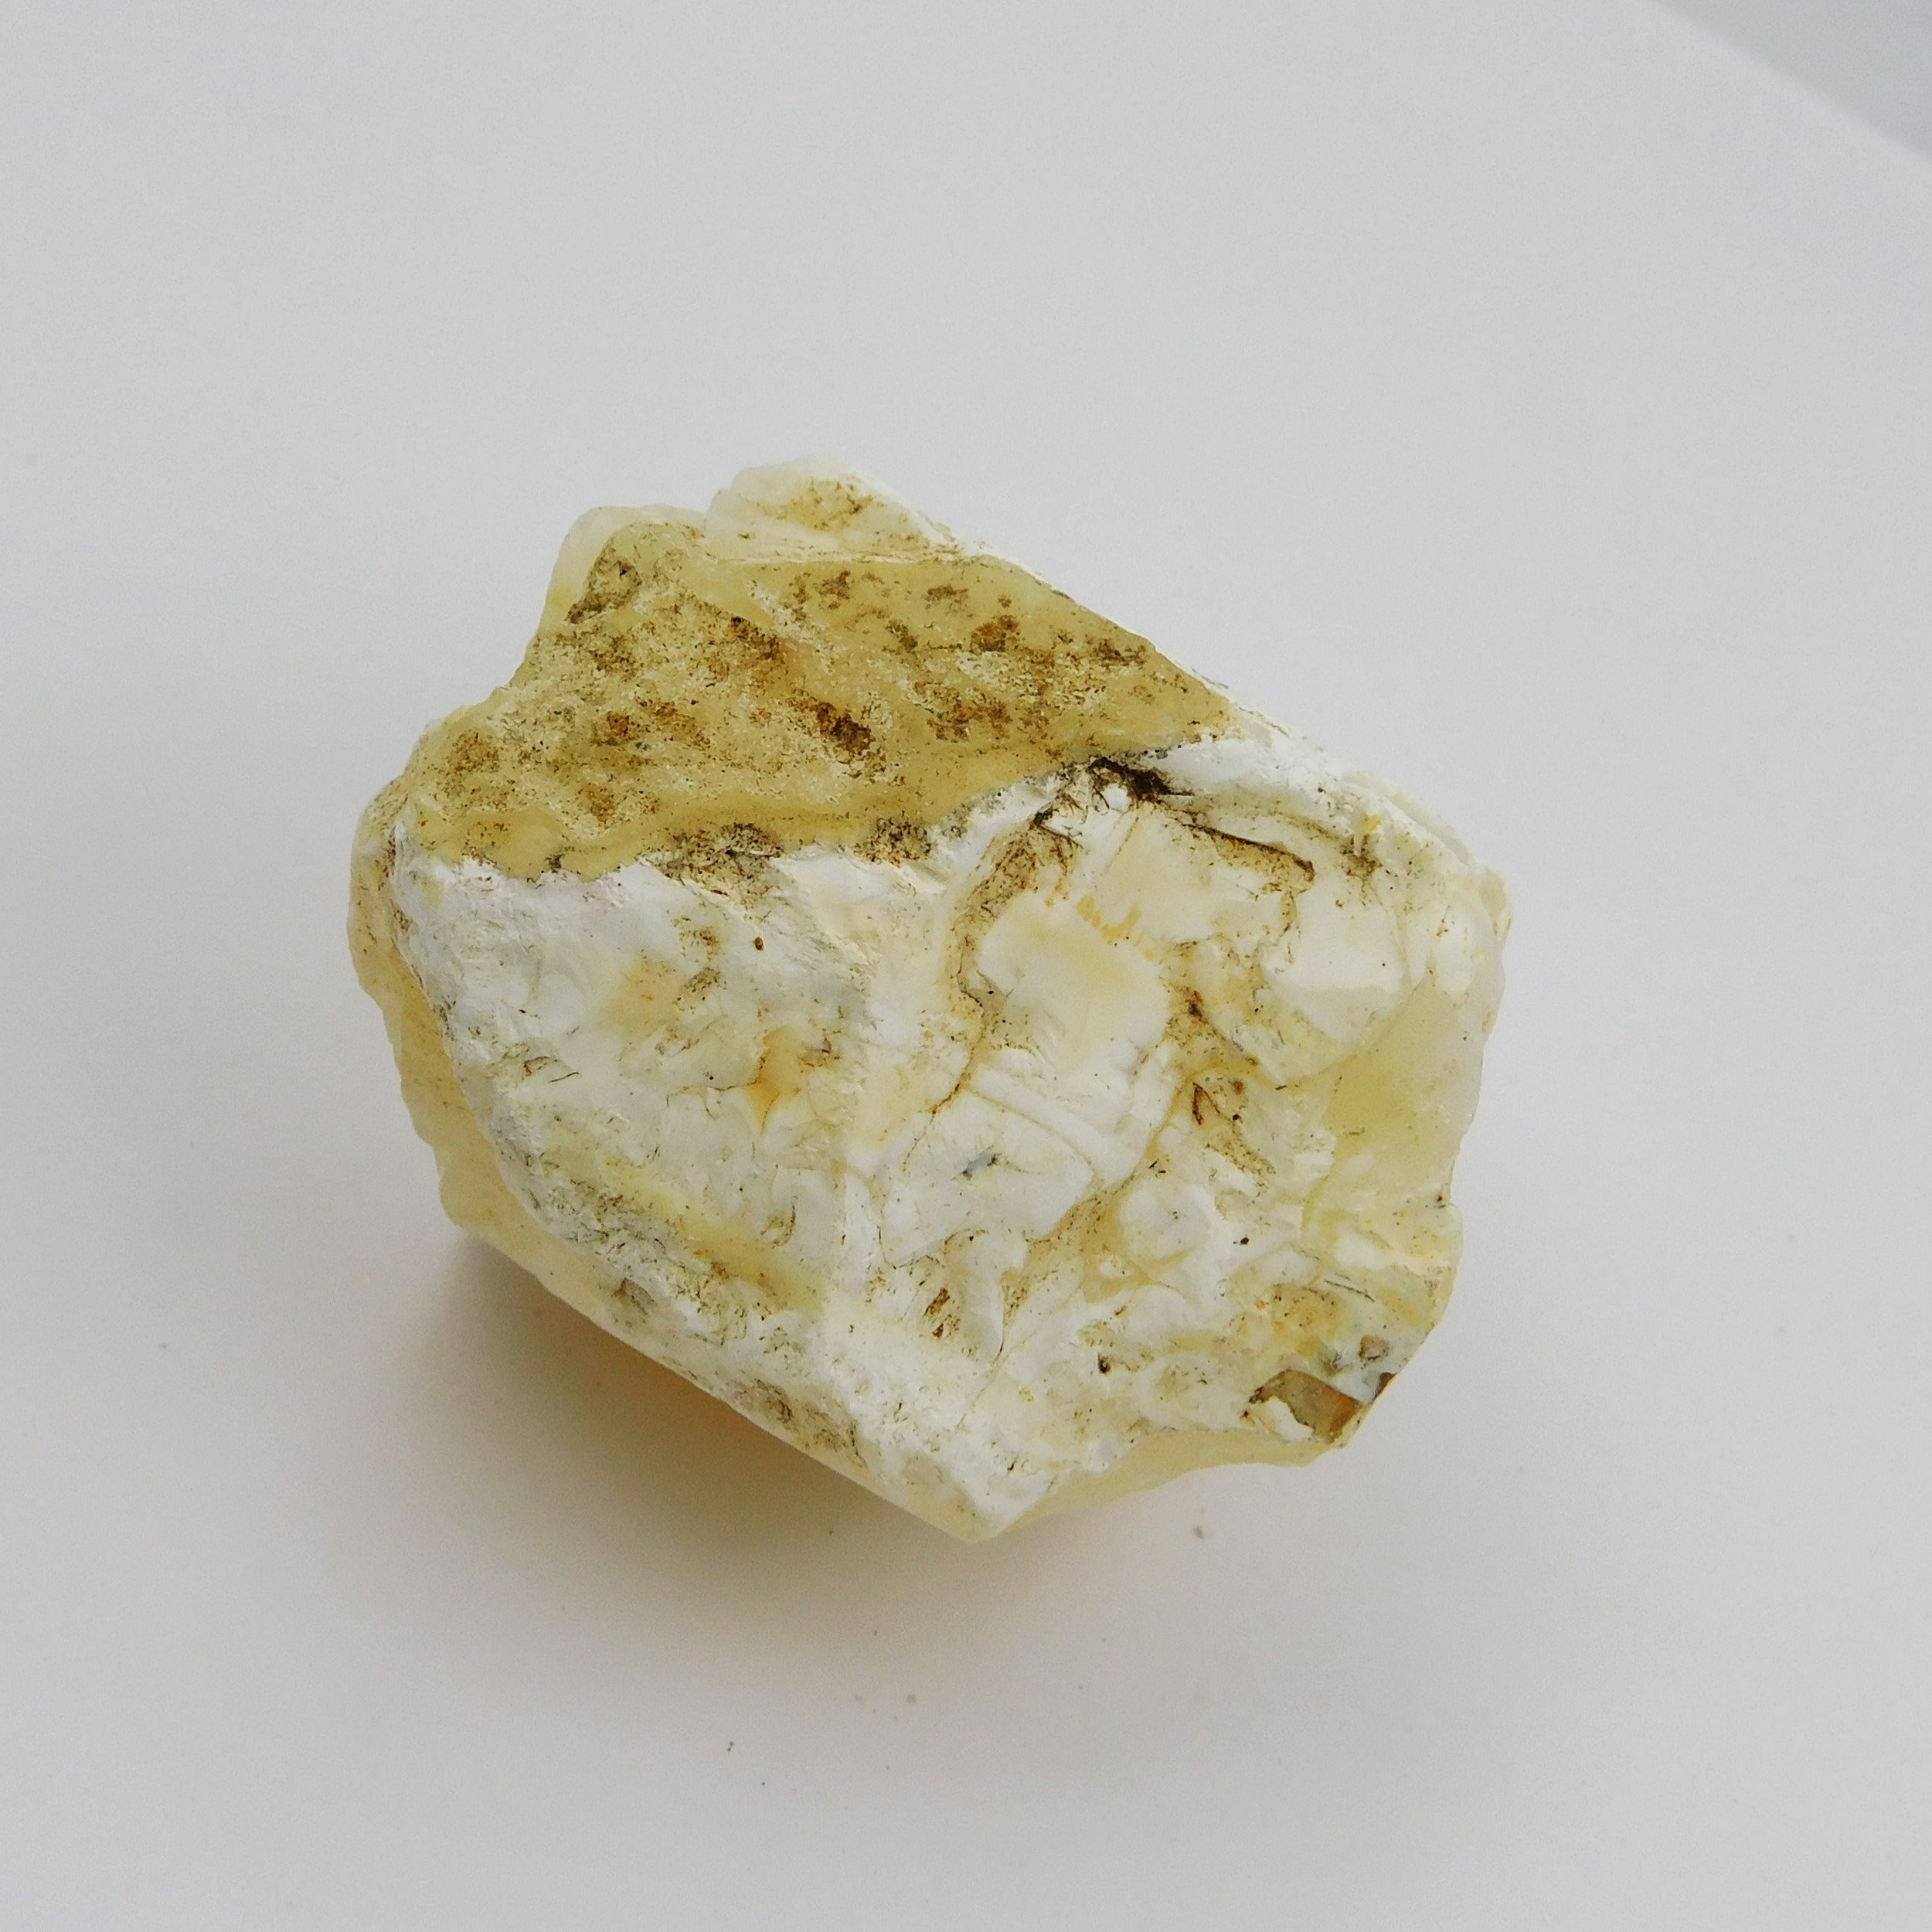 Huge Size Natural White Color Opal Rough 273.60 Carat Certified 100% Loose Gemstone Rough | Free Delivery Free Gift | Opal Rough Gemstone - Free Delivery Free Gift